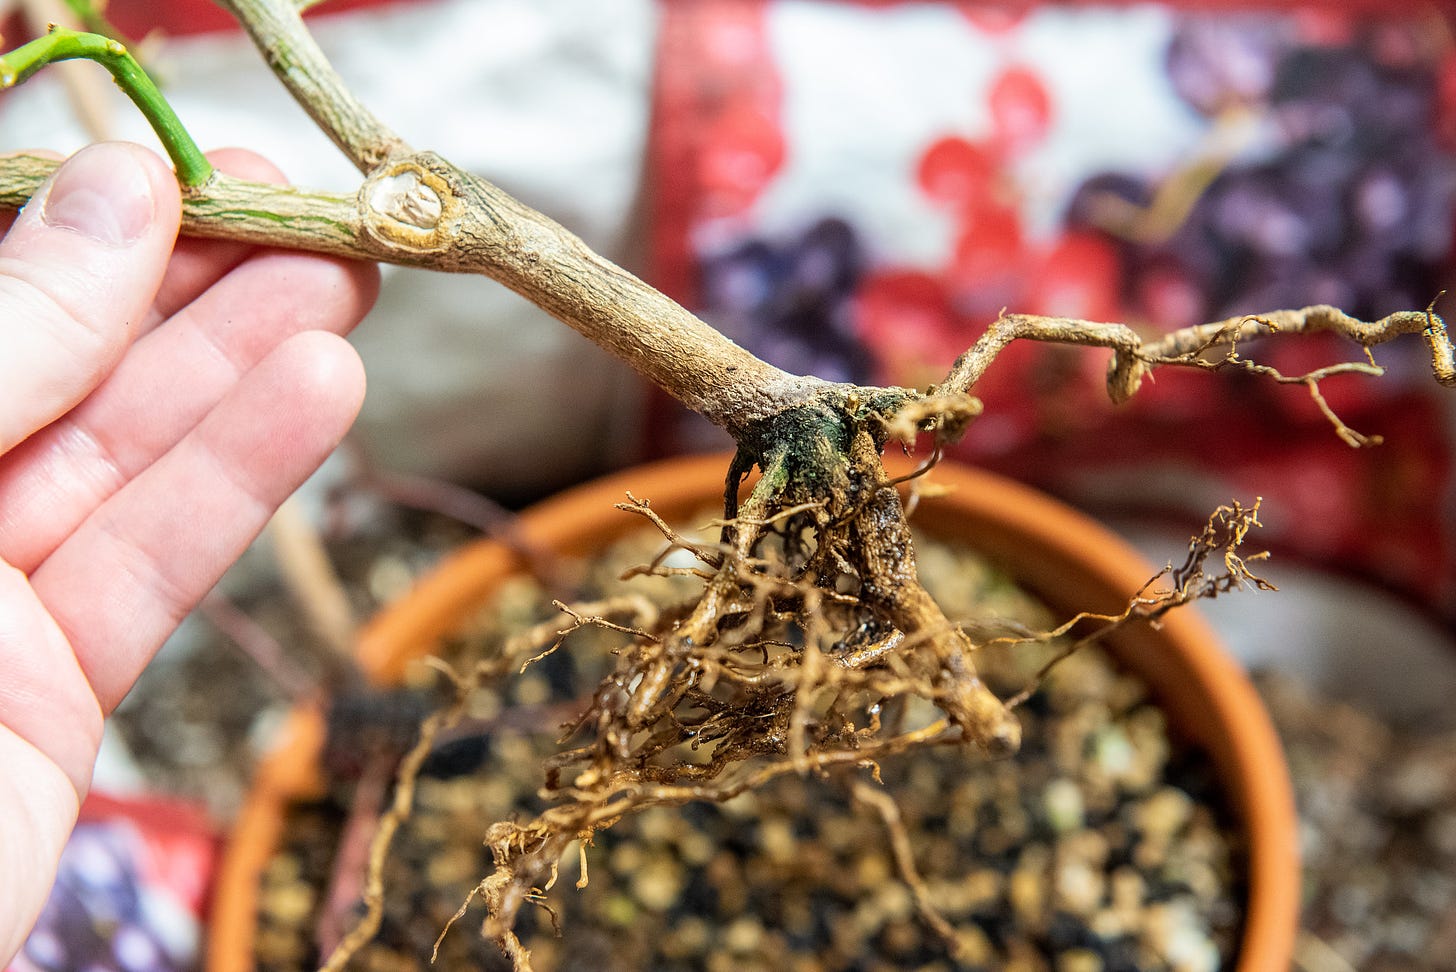 ID: Closer look at the thin, scraggly roots